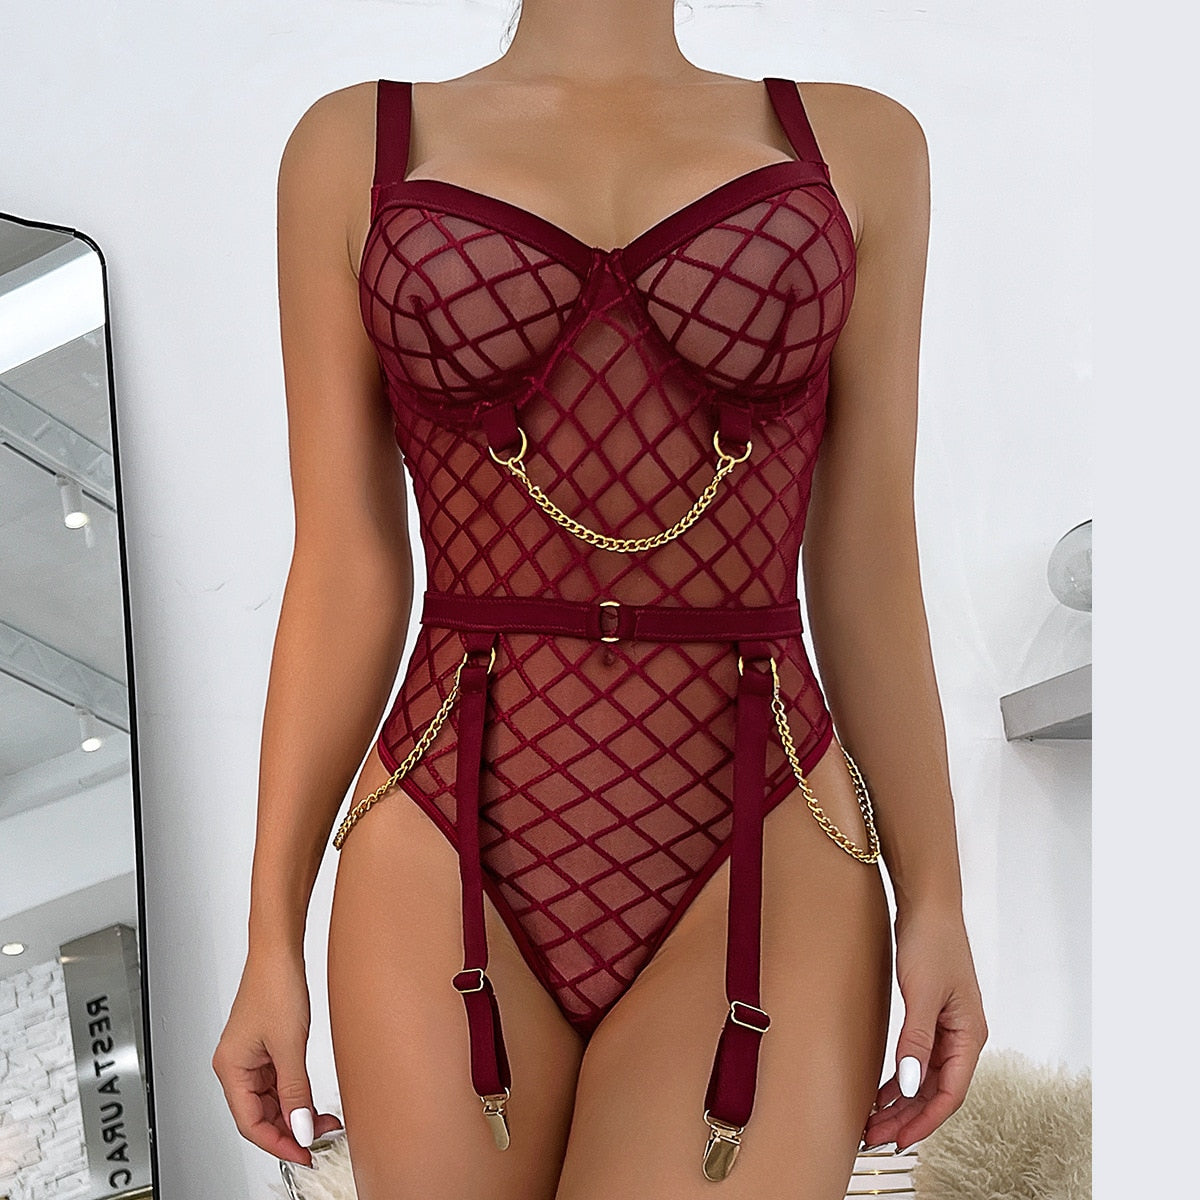 Plaid Bodysuit Sensual Lingerie With Chain Open Crotchless Teddy Bear Transparent Lace Sissy Erotic Body Sexy Tights